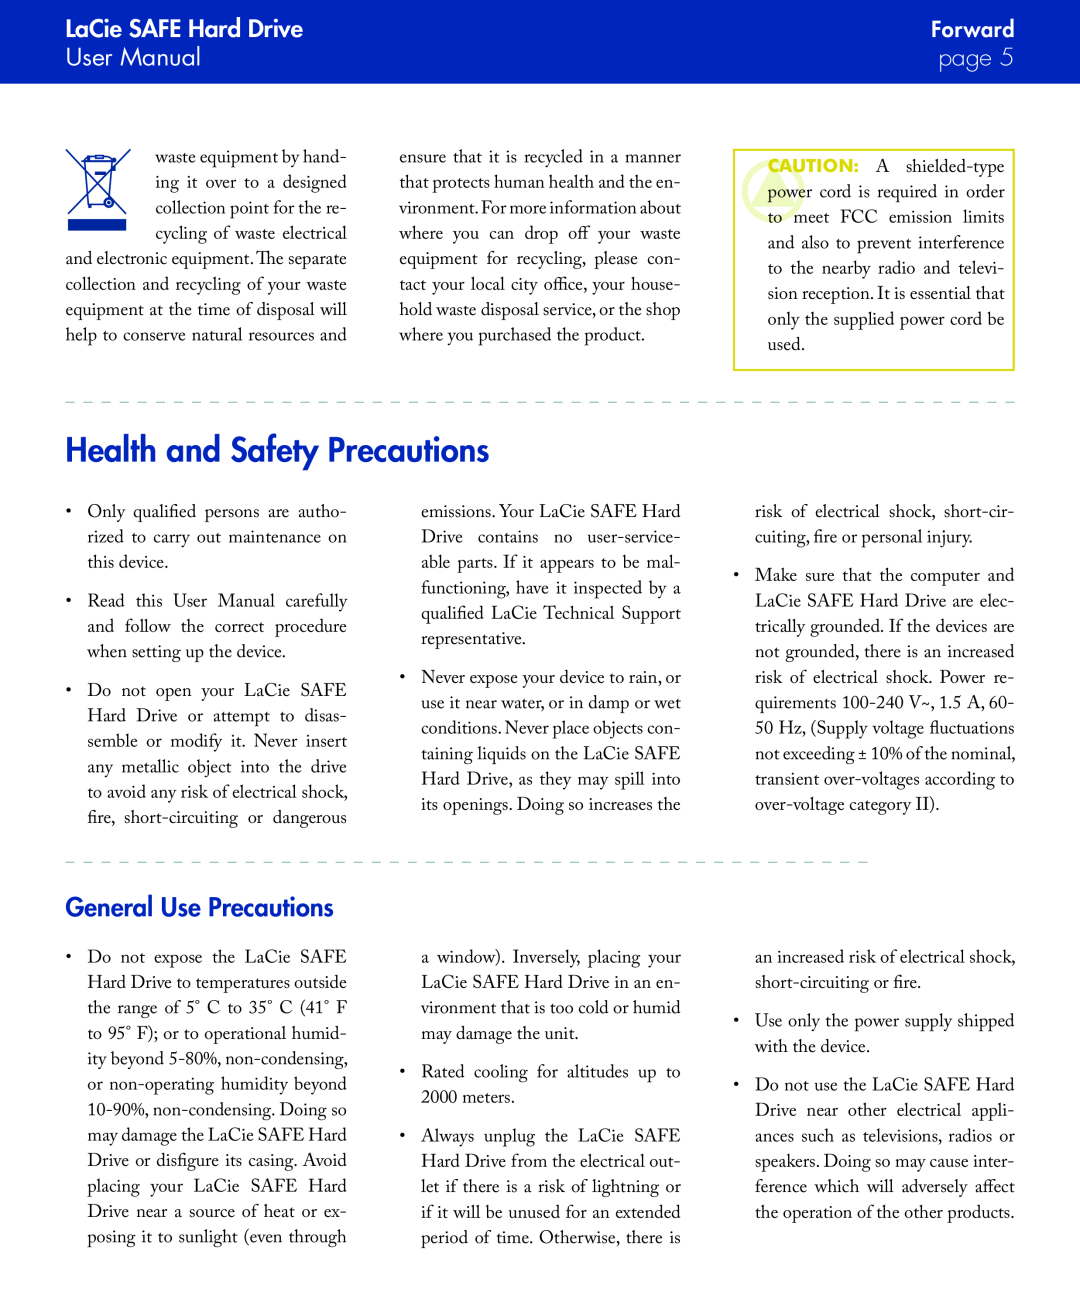 LaCie manual Health and Safety Precautions, General Use Precautions, LaCie SAFE Hard Drive User Manual, page , Forward 